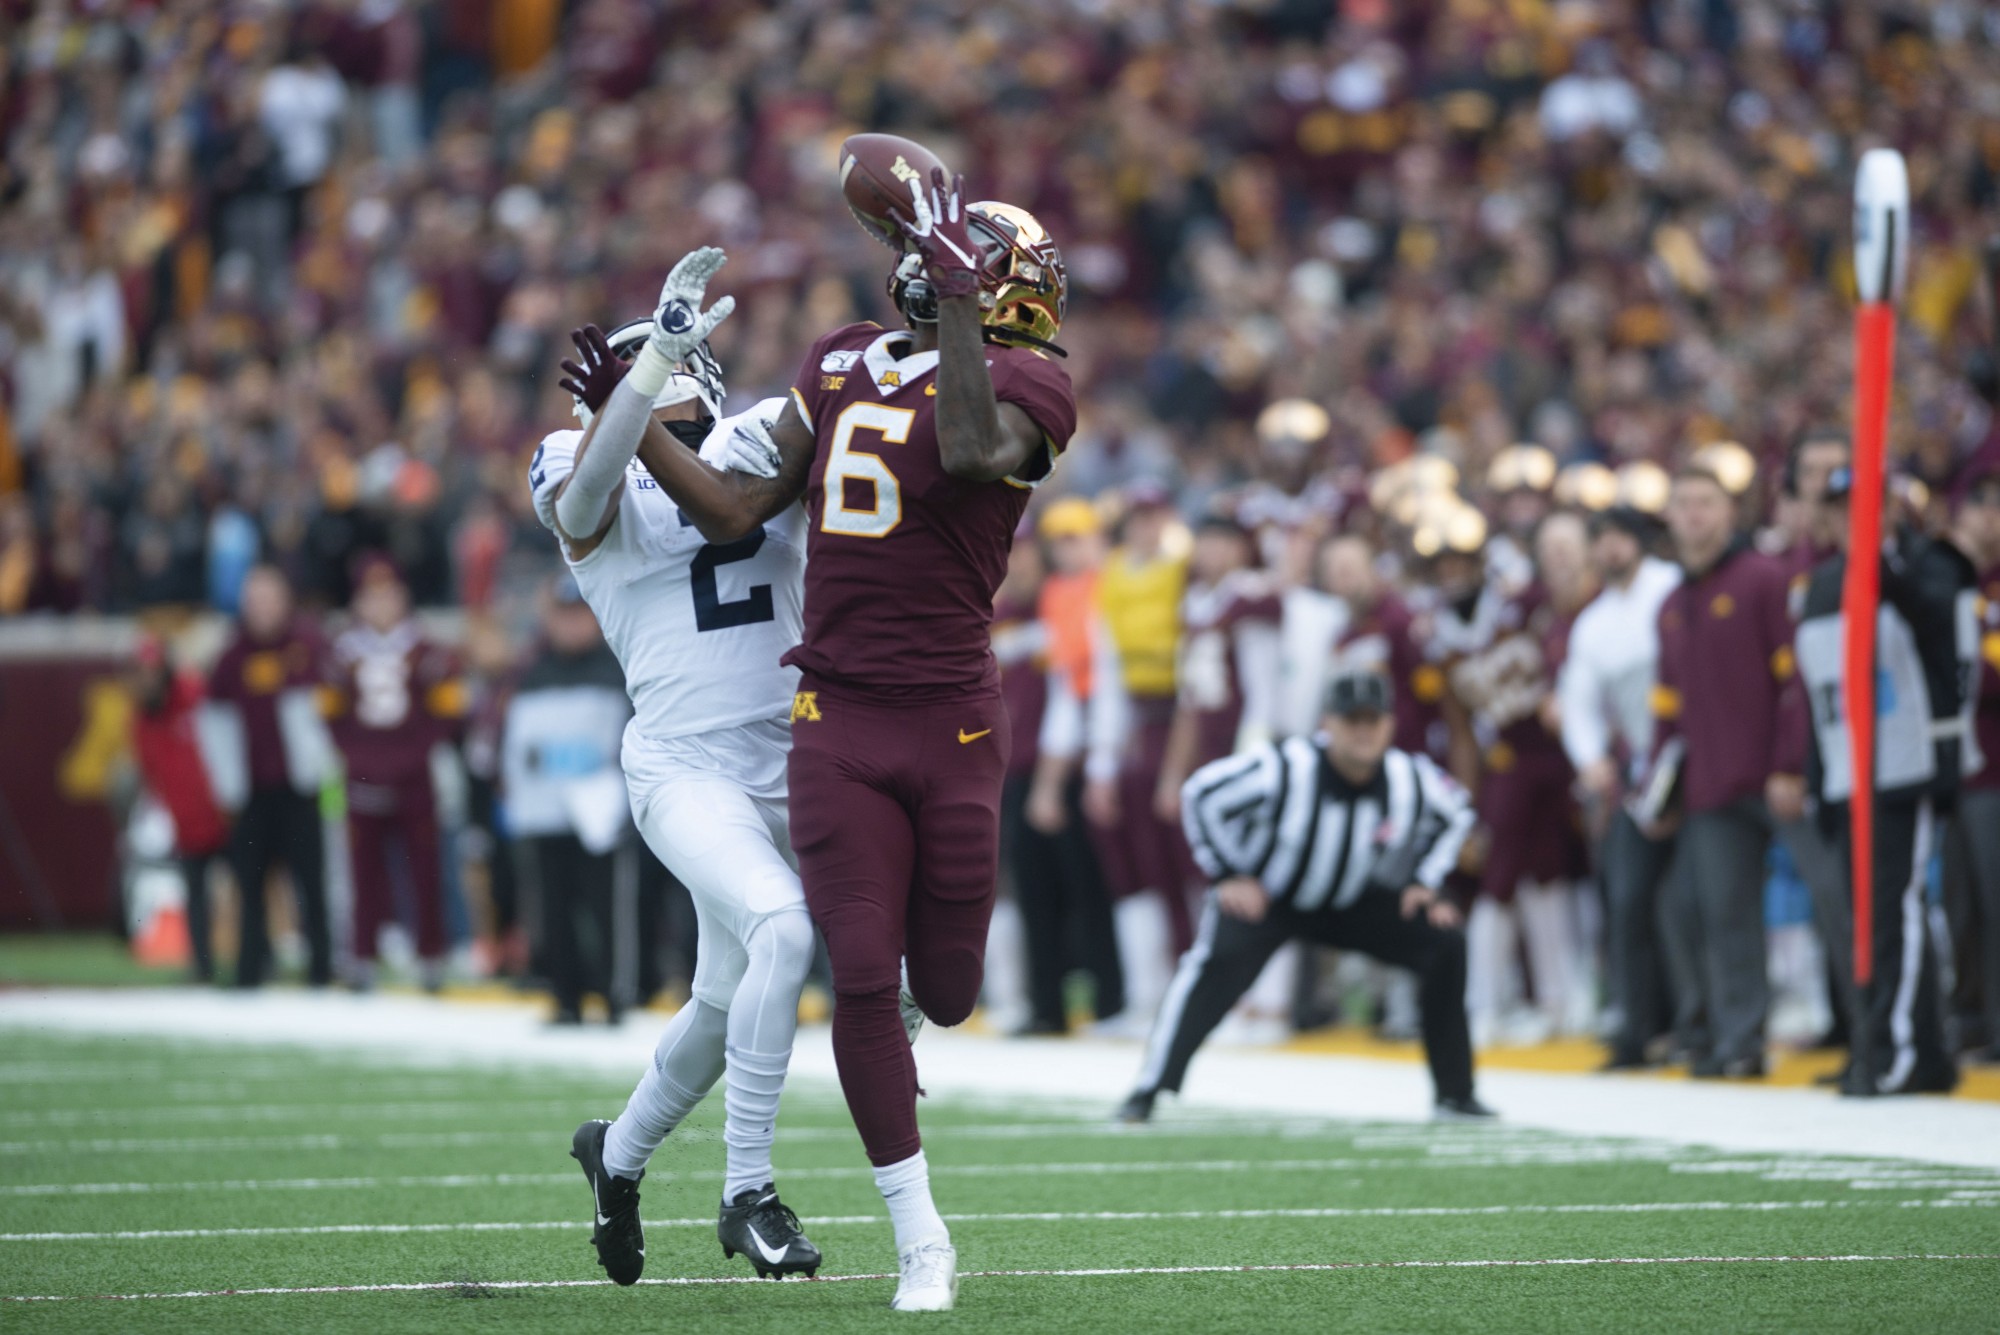 Wide receiver Tyler Johnson looks to catch a pass at TCF Bank Stadium on Saturday, Nov. 9.The Gophers defeated Penn State 31-26 to bring their record to 9-0. A first since 1904. 